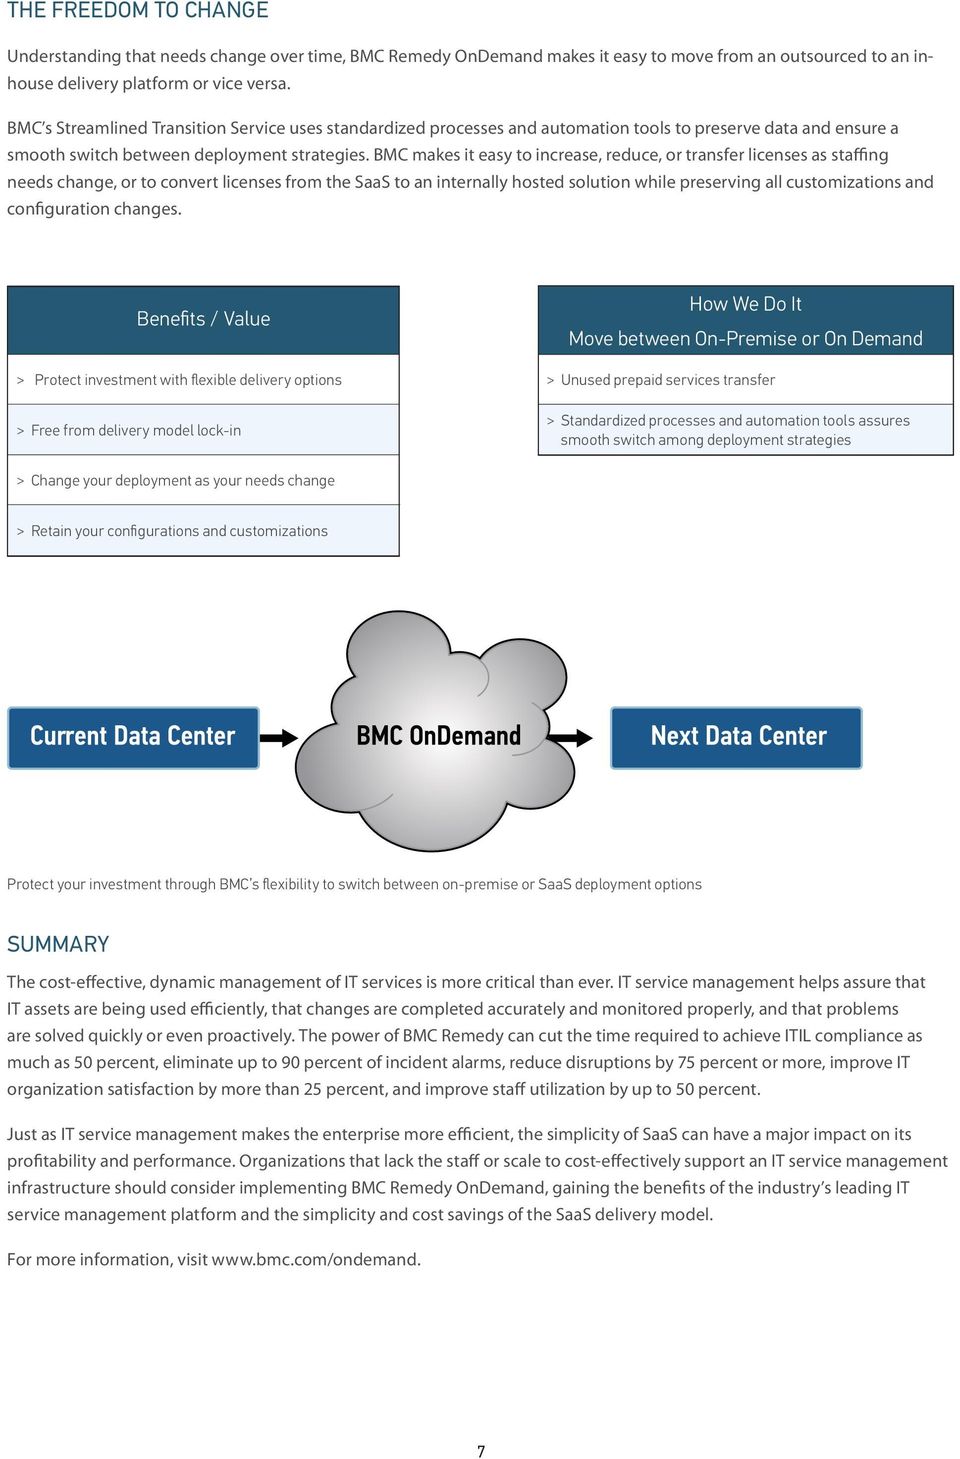 BMC makes it easy to increase, reduce, or transfer licenses as staffing needs change, or to convert licenses from the SaaS to an internally hosted solution while preserving all customizations and